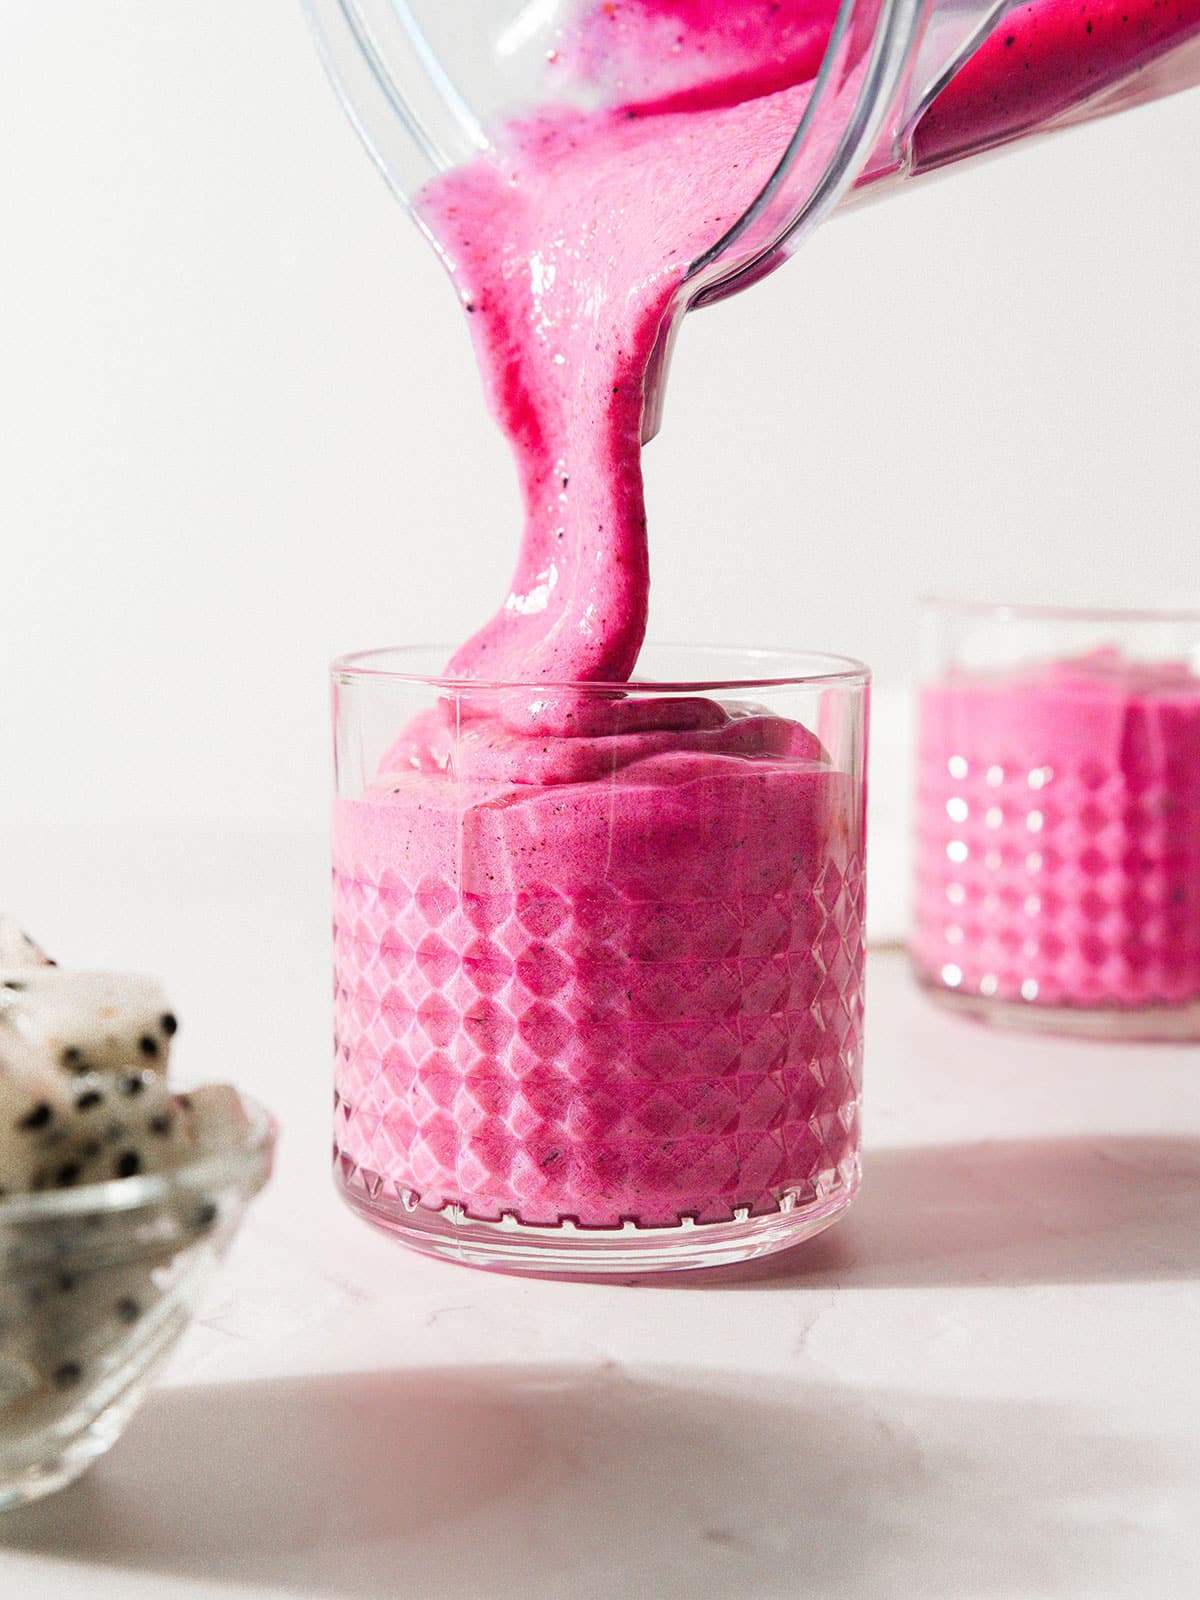 Pouring dragon fruit smoothie into a cup.